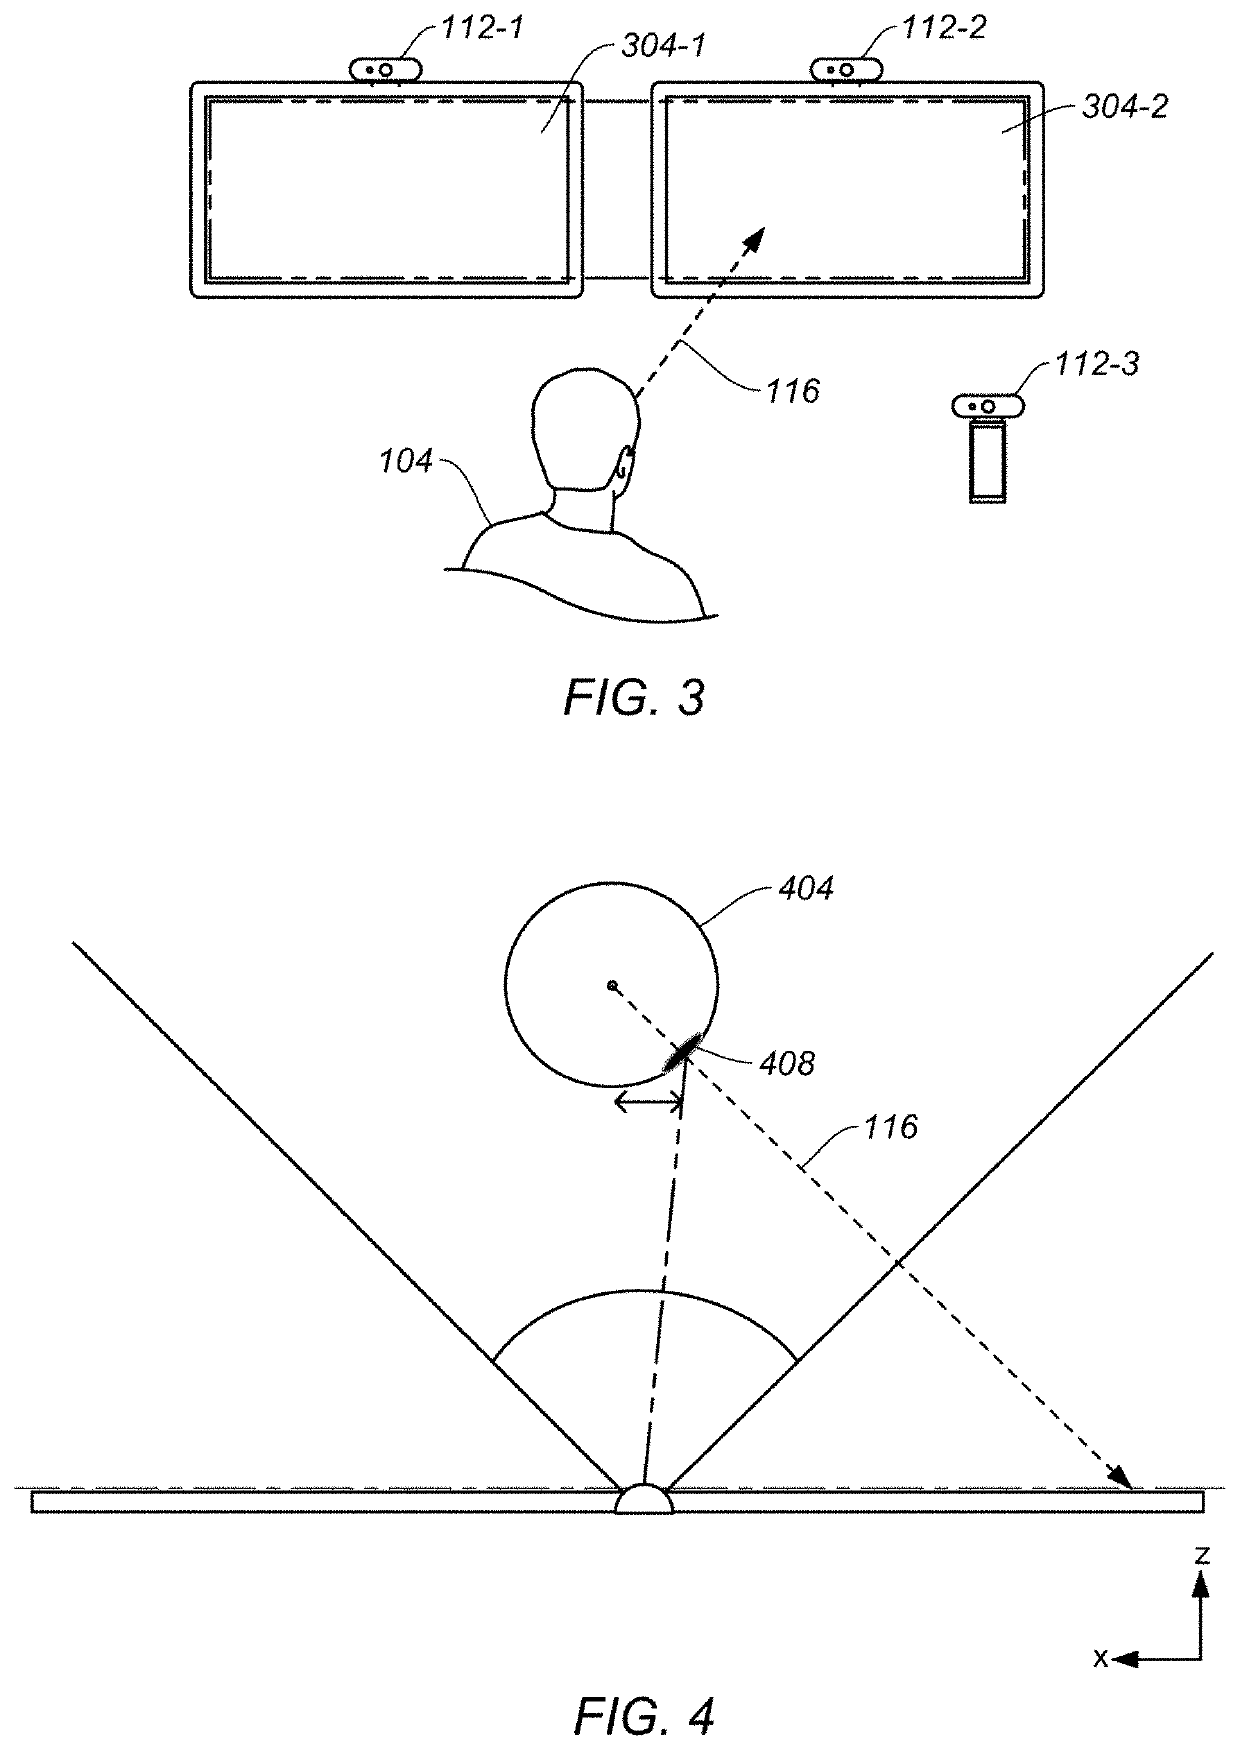 User recognition and gaze tracking in a video system